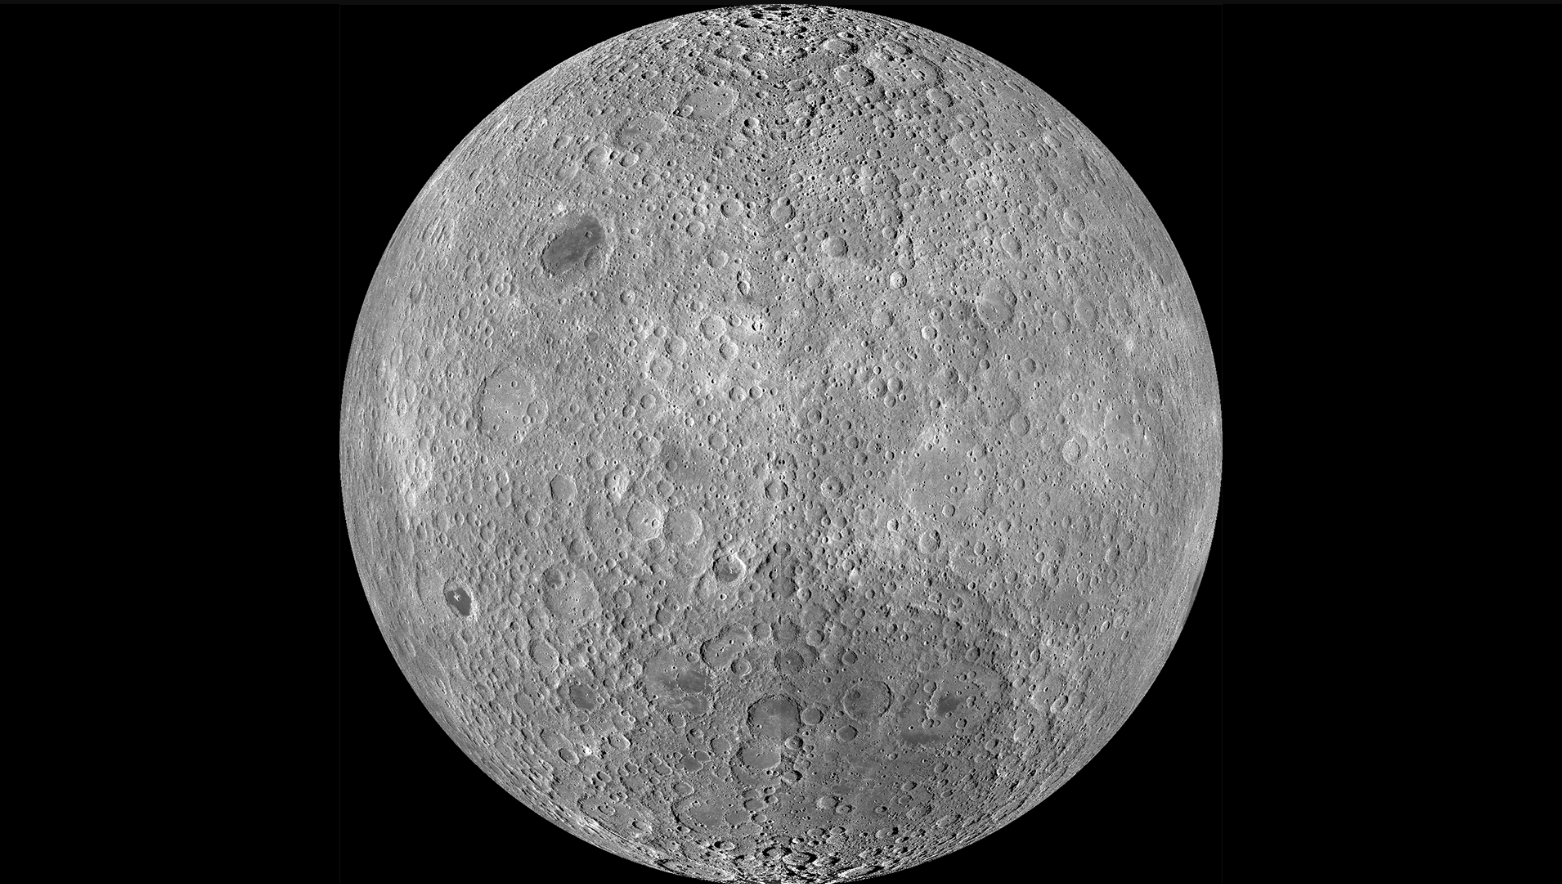 NASA suggested in 2011 that the Moon had an iron-rich, solid core, as well as a fluid outer core. (Image: NASA/Goddard/Arizona State University)